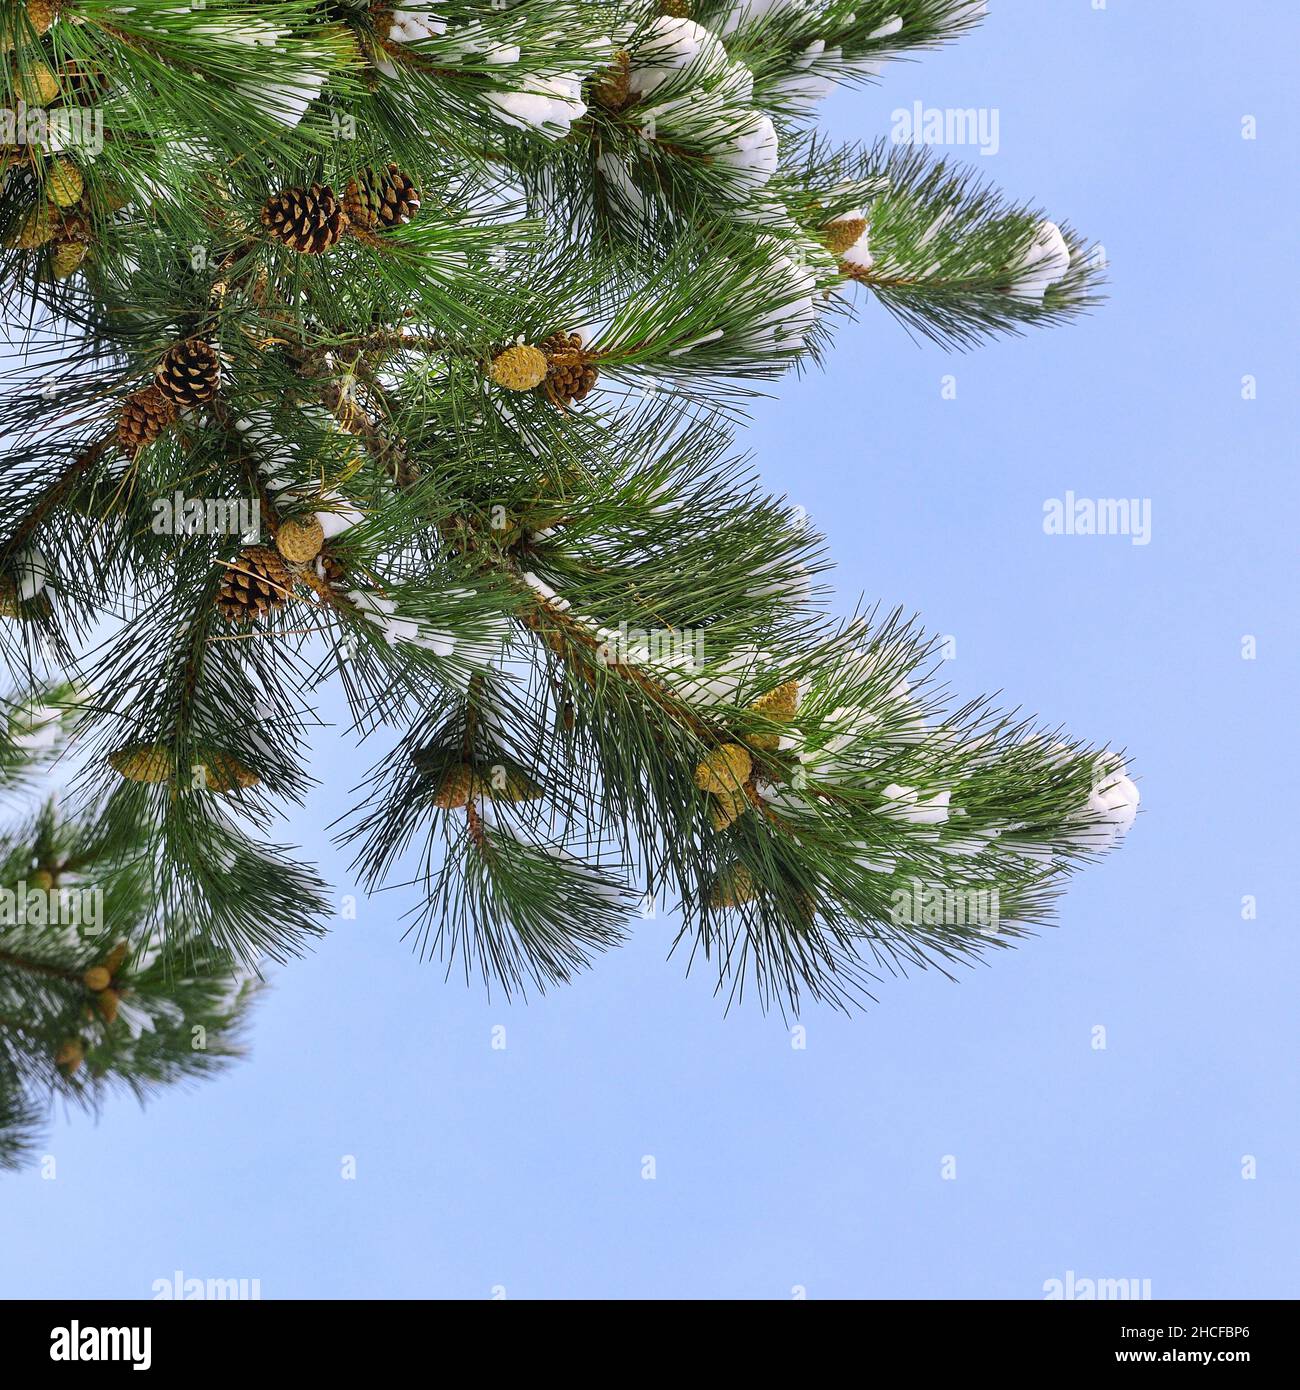 Pine branch with cones and snow against the blue sky. Stock Photo